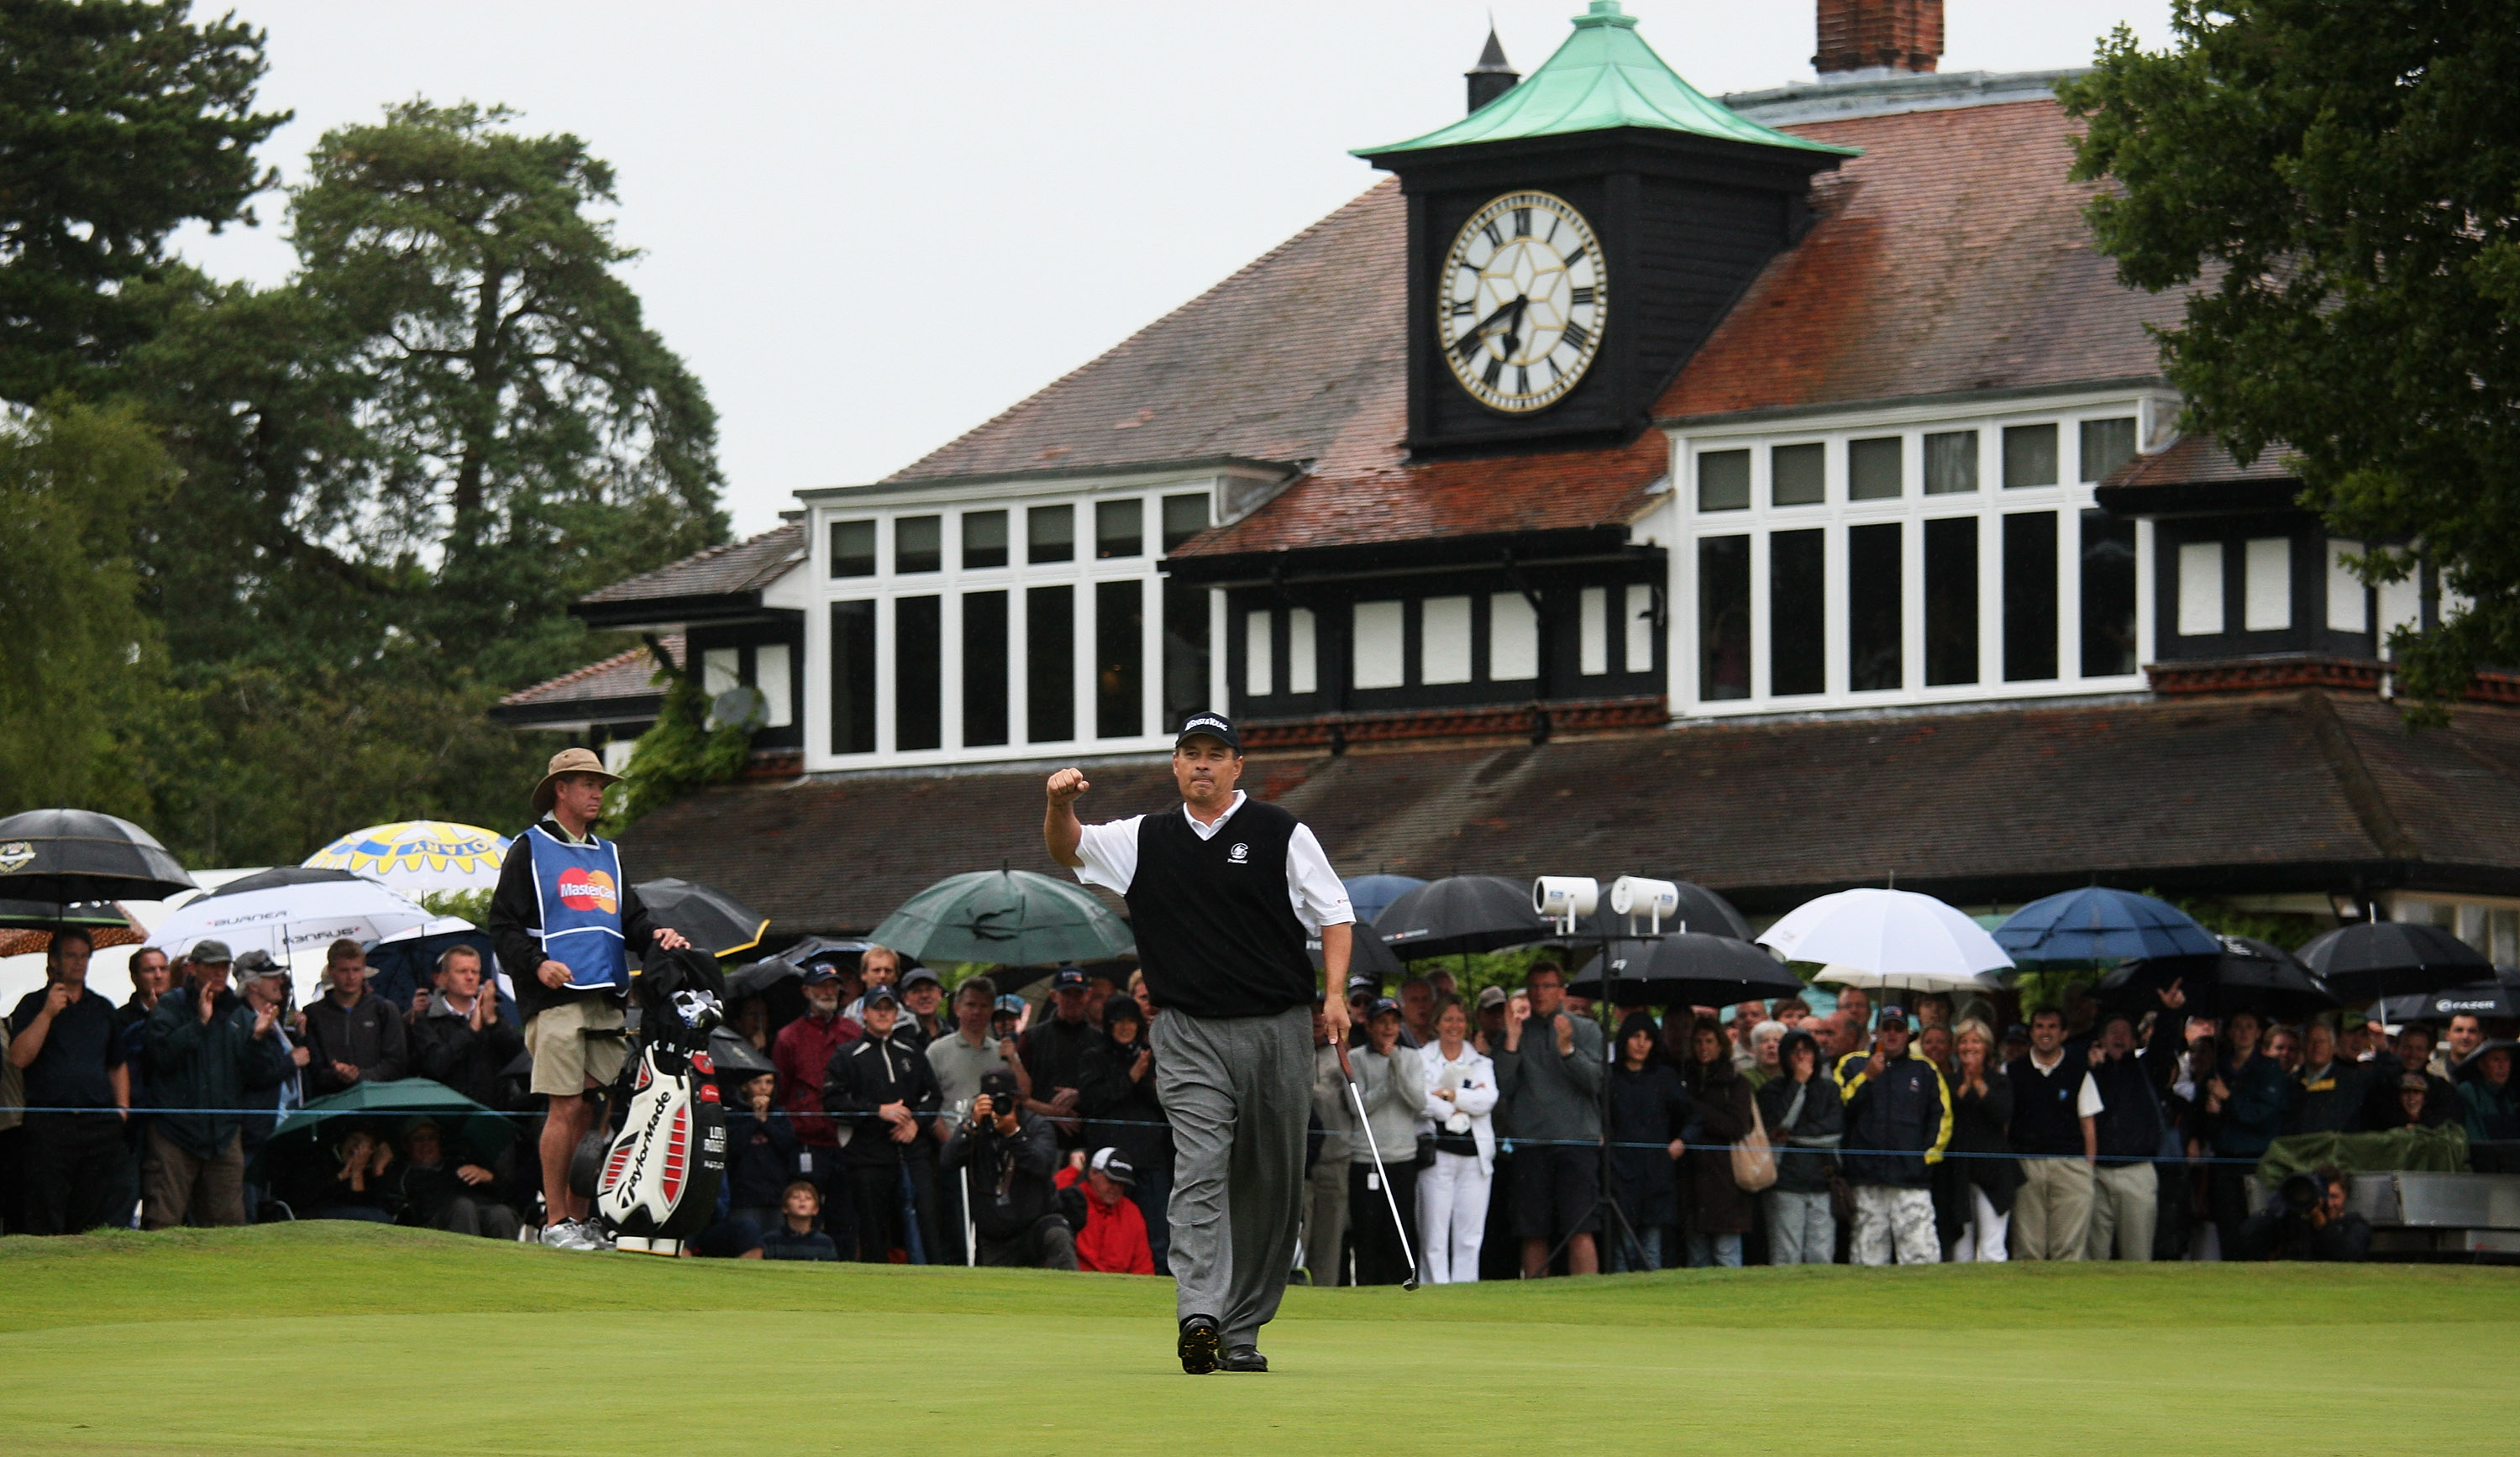 Loren Roberts won the Senior Open at Sunningdale in 2009 (Photo: Getty Images)